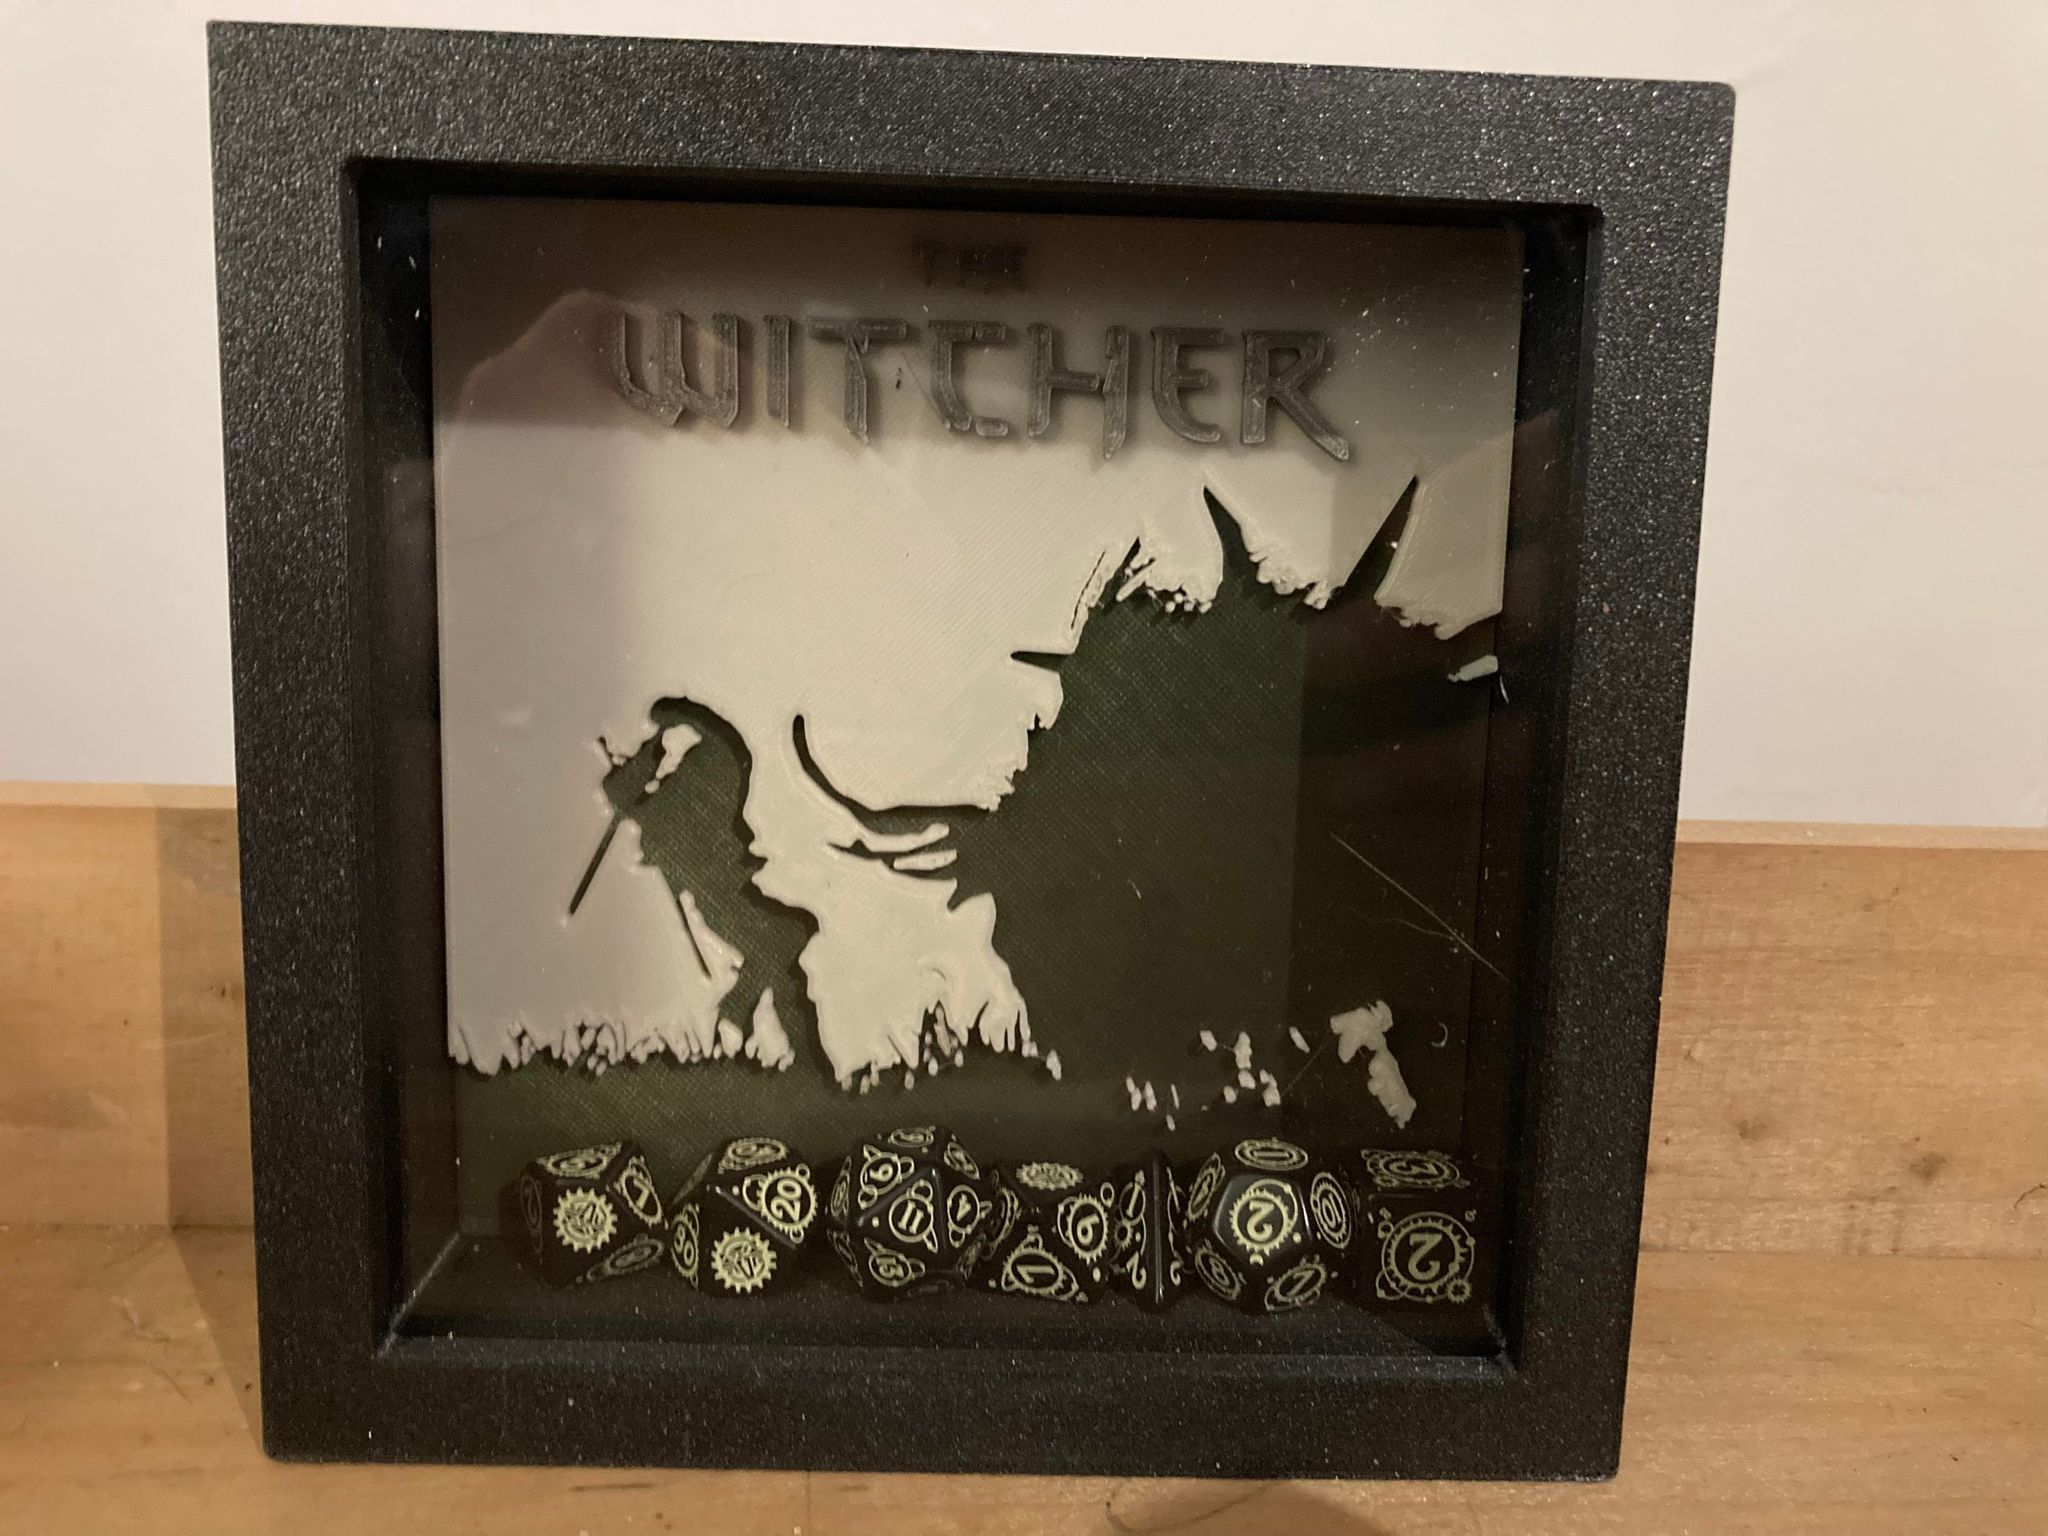 3D Printed The Witcher Dice Box